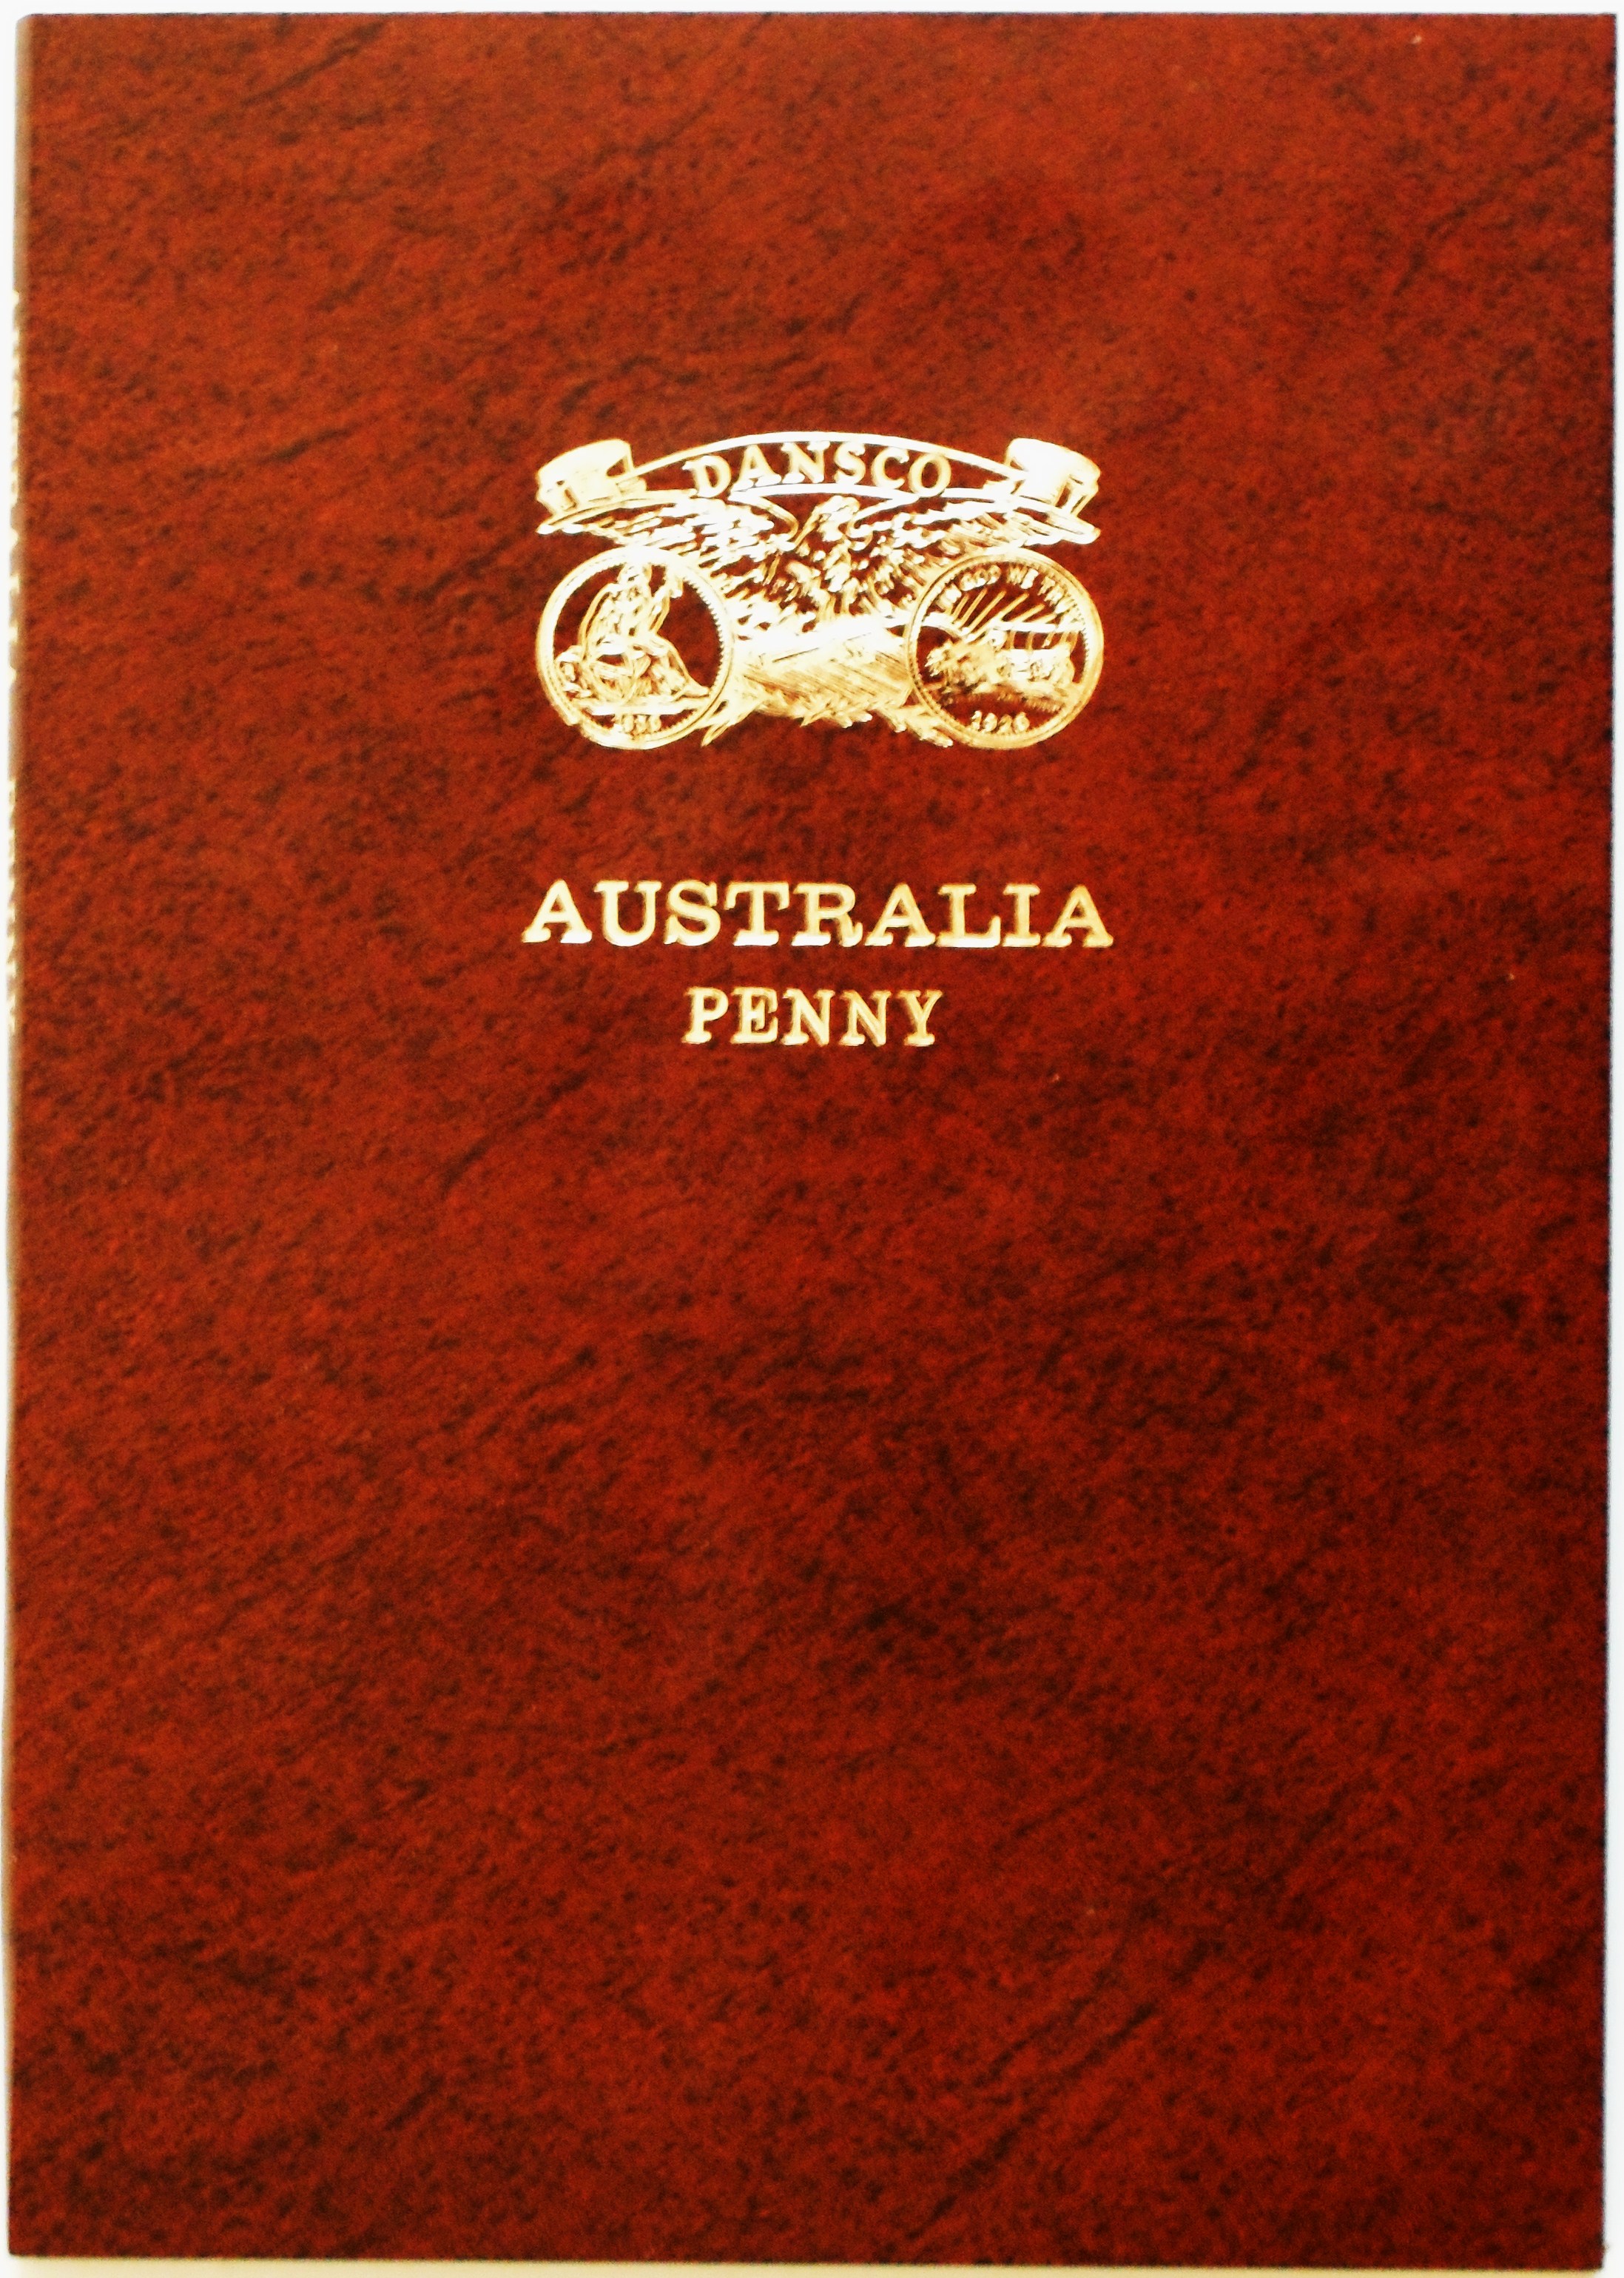 Dansco deluxe coin folders and supreme albums for Australian coins